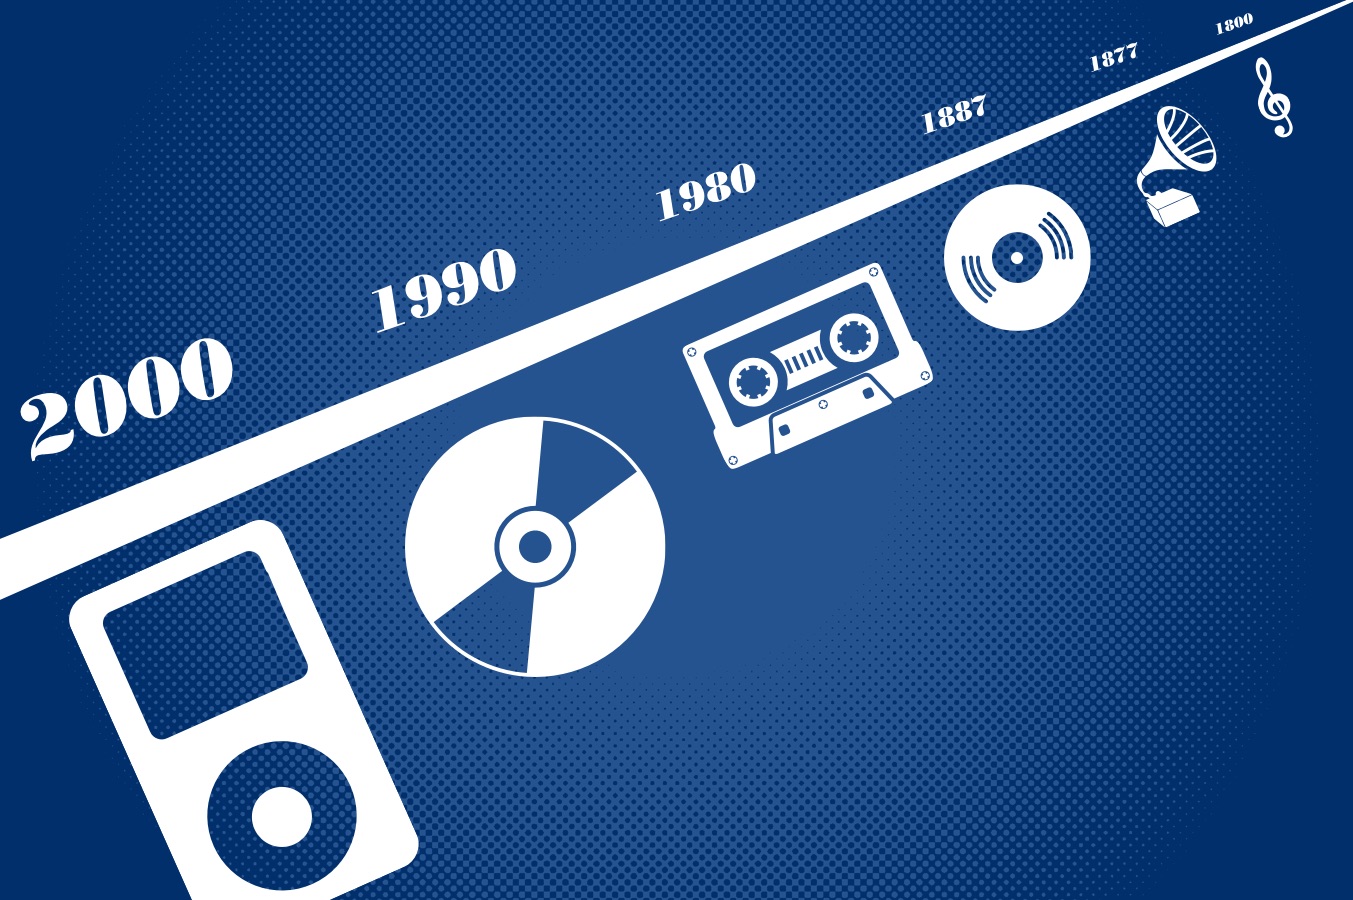 Illustration of how people listened to music through the years